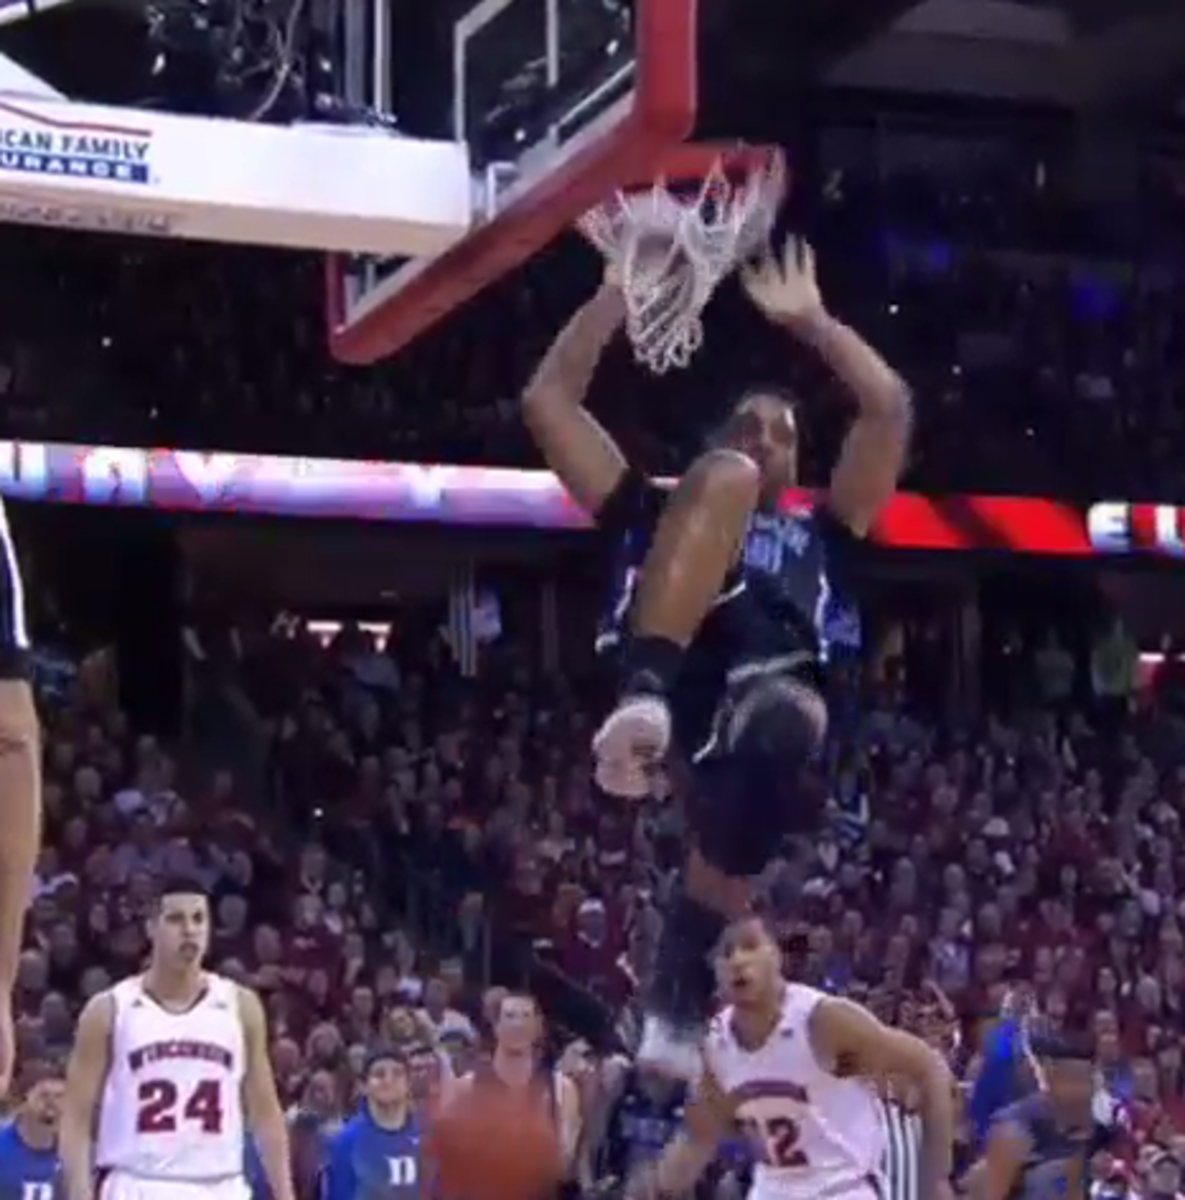 Duke player throws down massive dunk against Wisconsin.